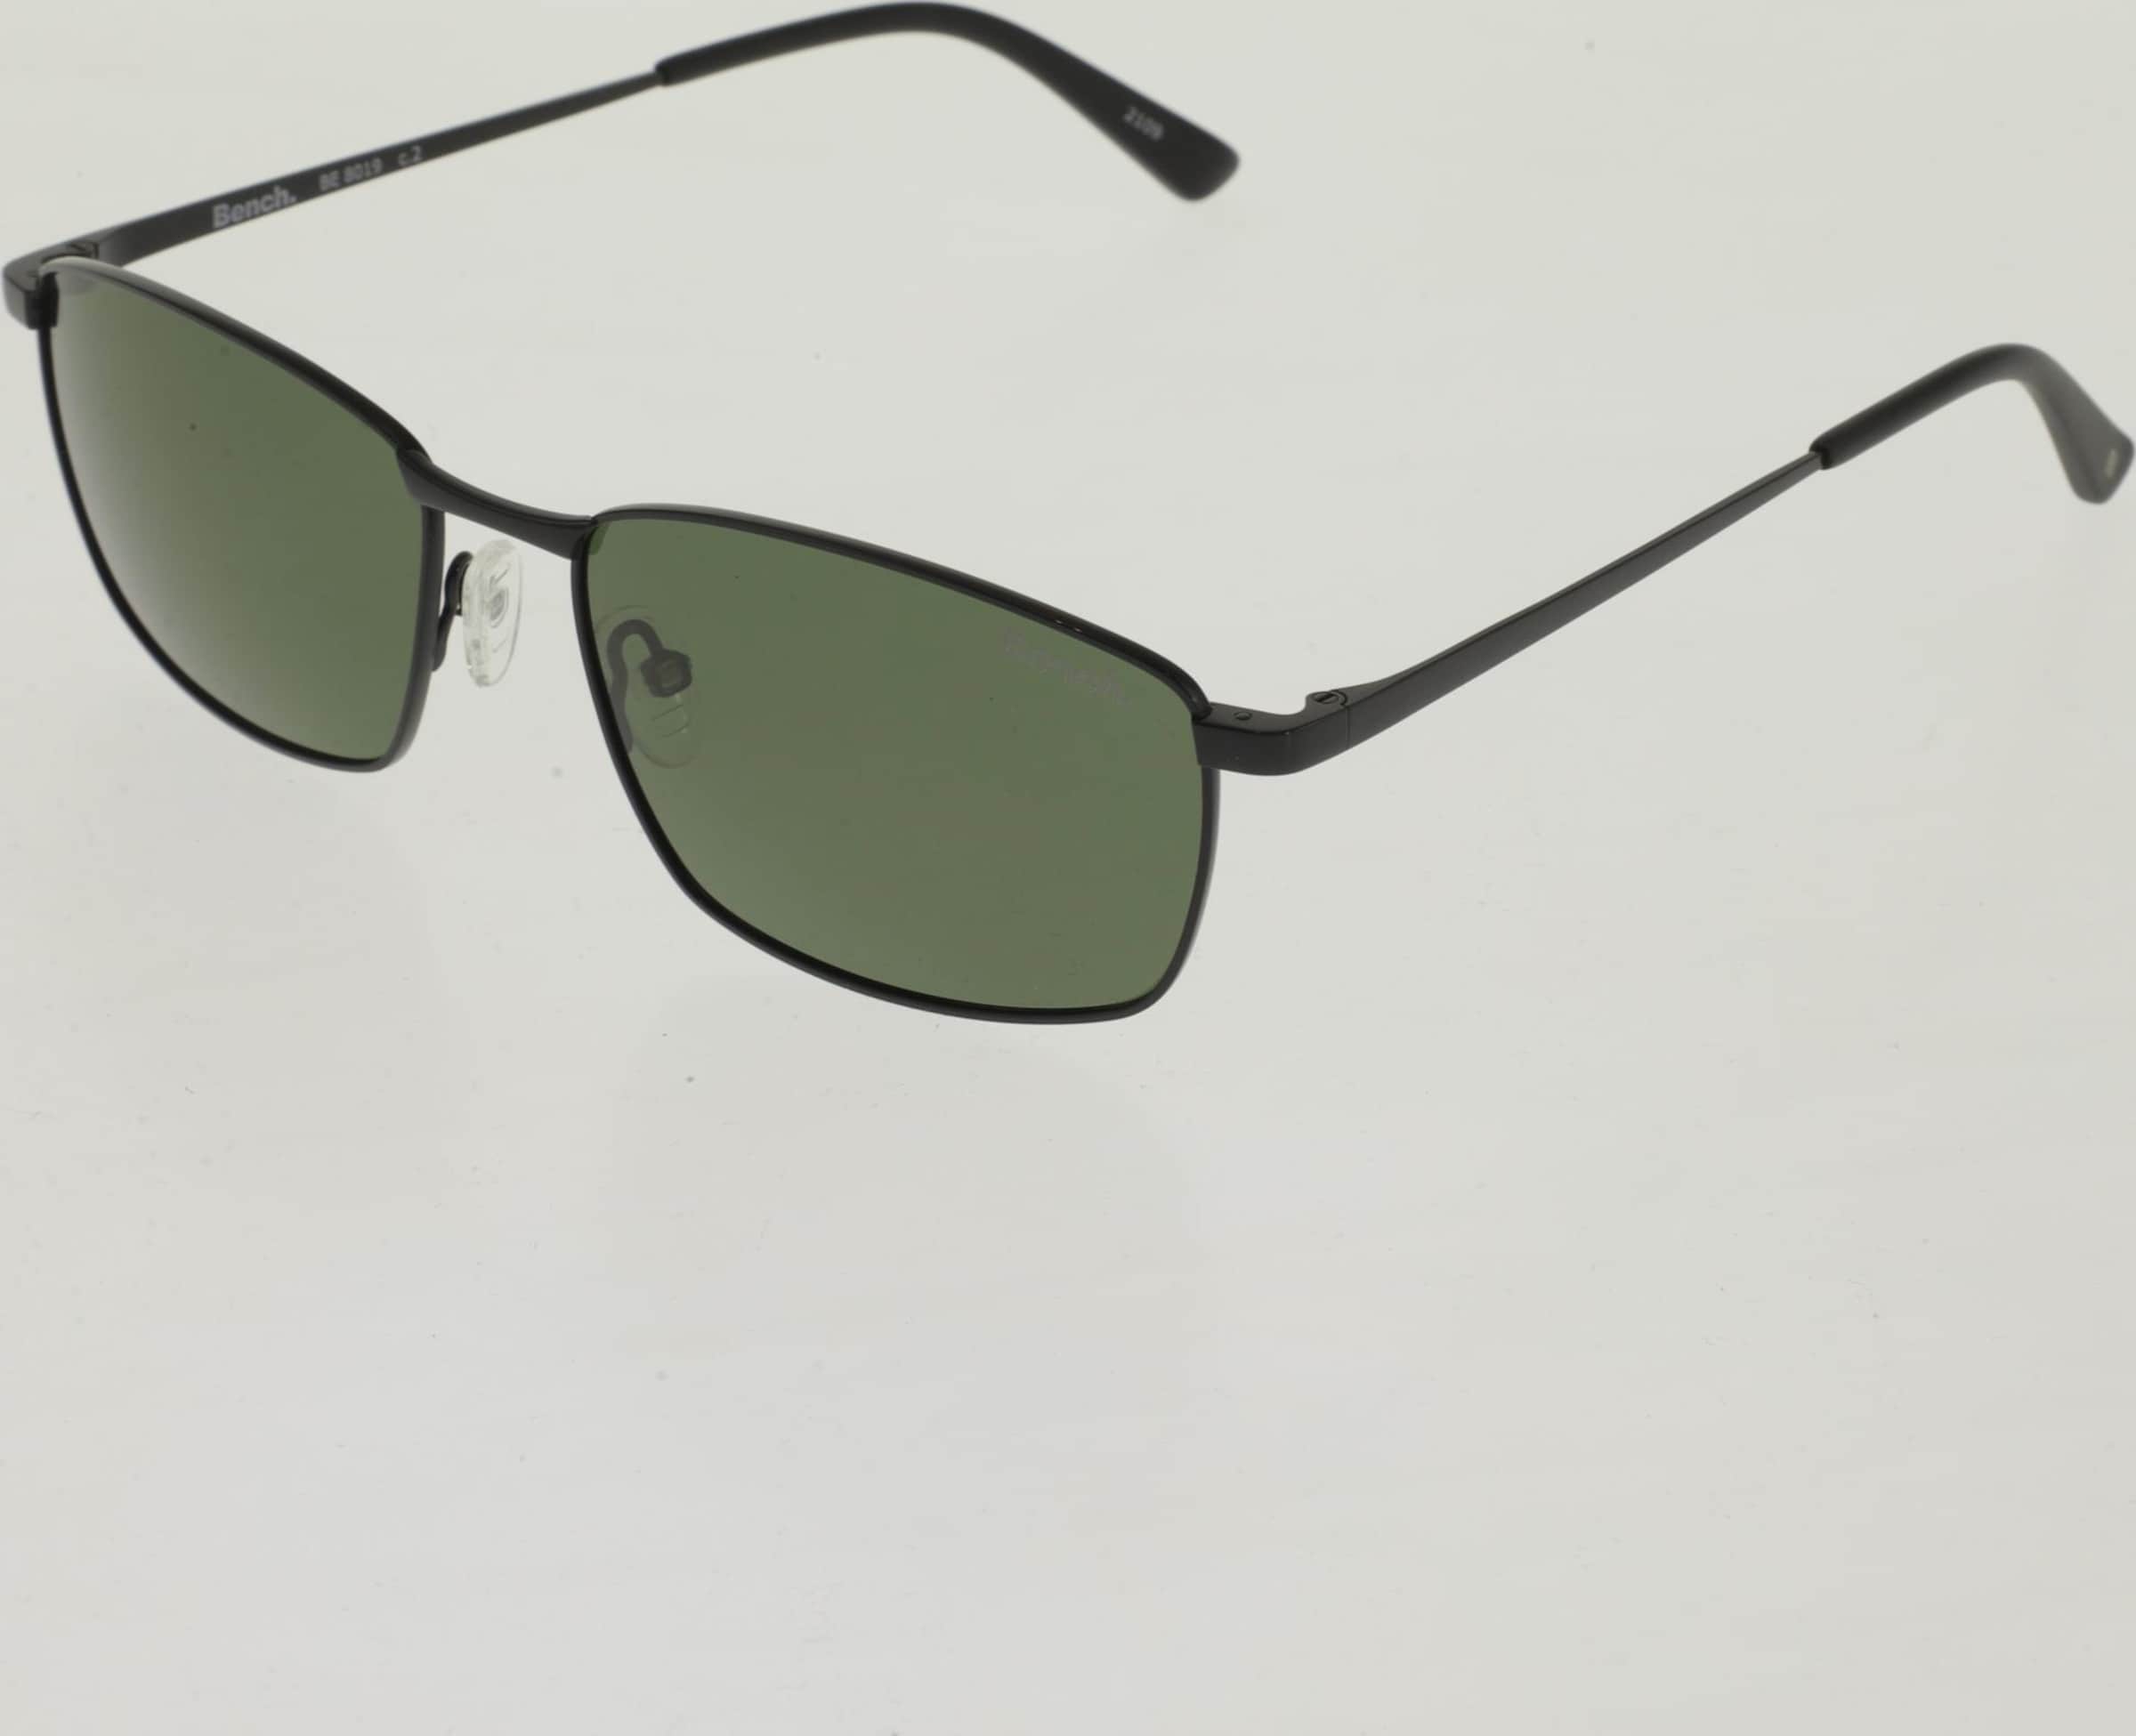 One | size in BENCH Sunglasses ABOUT Black in YOU